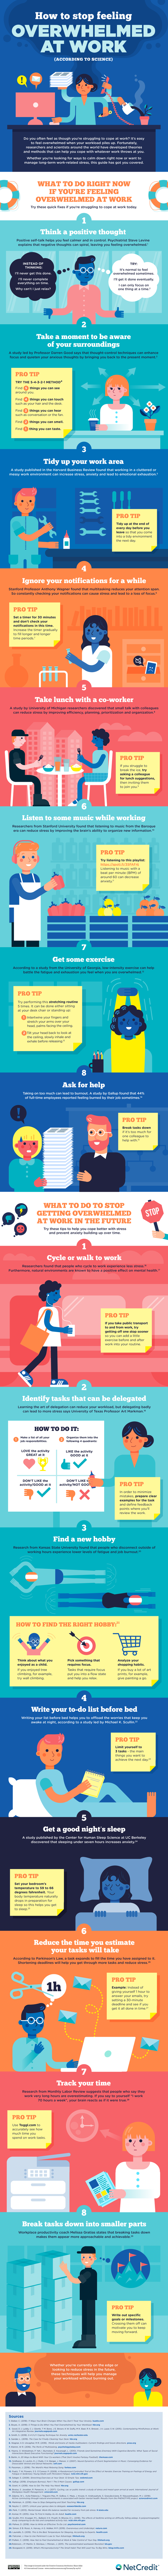 infographic how to stop feeling overwhelmed at work